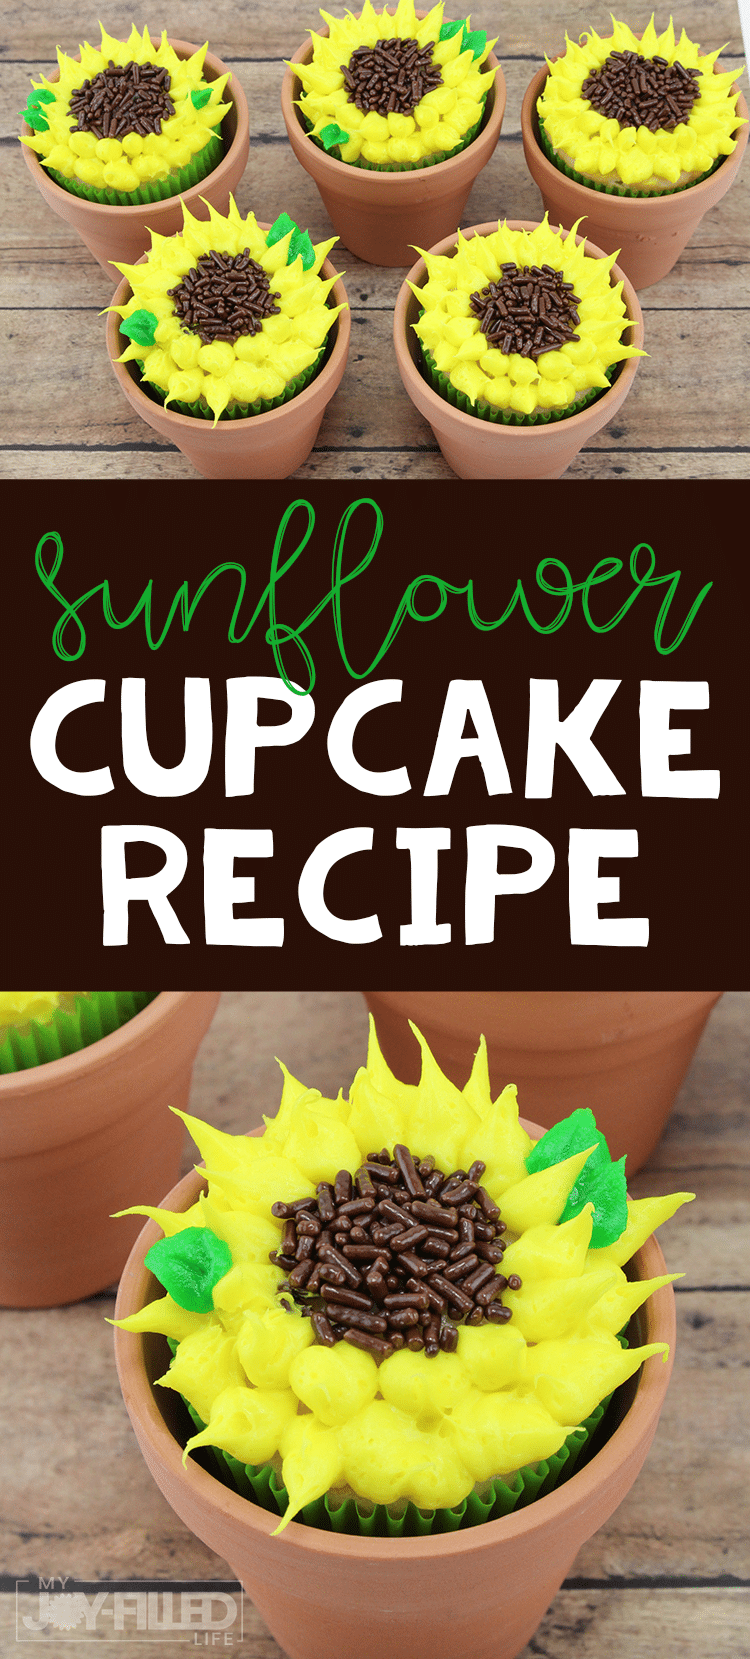 If you're looking for the perfect cupcake for your next summer or fall gathering, you are going to love this sunflower cupcakes recipe. So cute and easy to make! #cupcakes #sunflowers #sunflowercupcakes